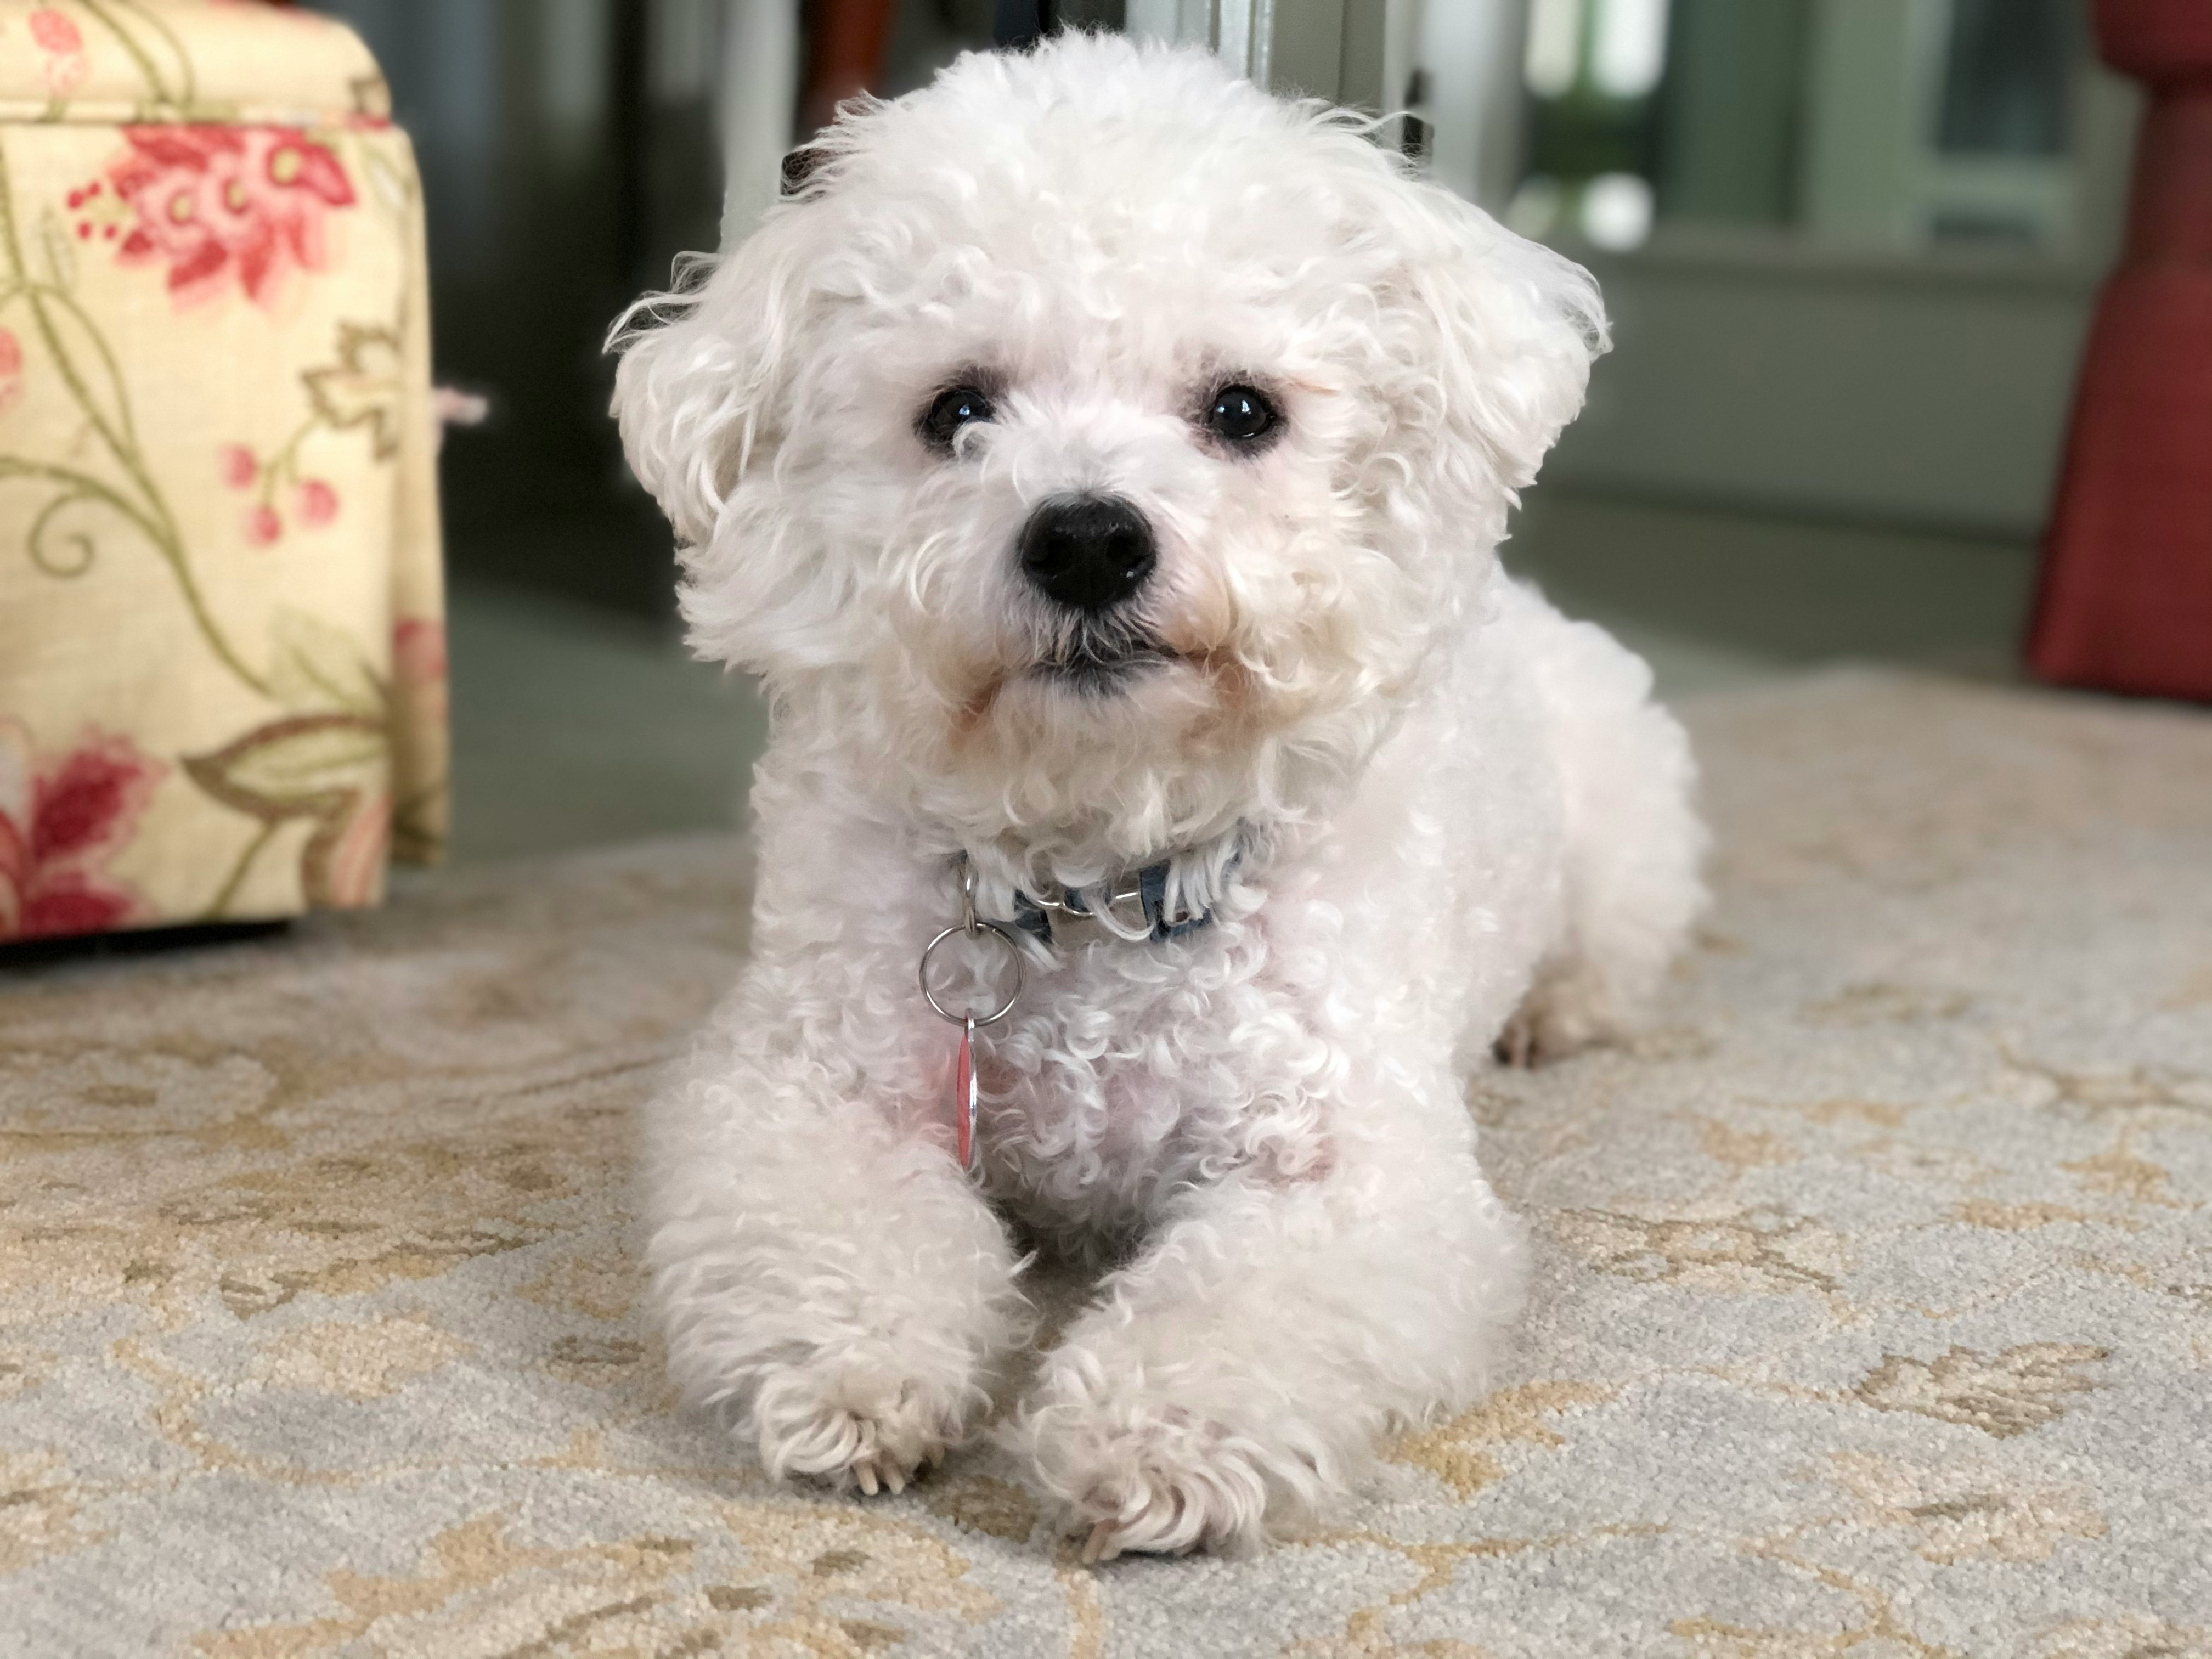 Bichpoo: The Adorable and Intelligent Bichon Poodle Mix